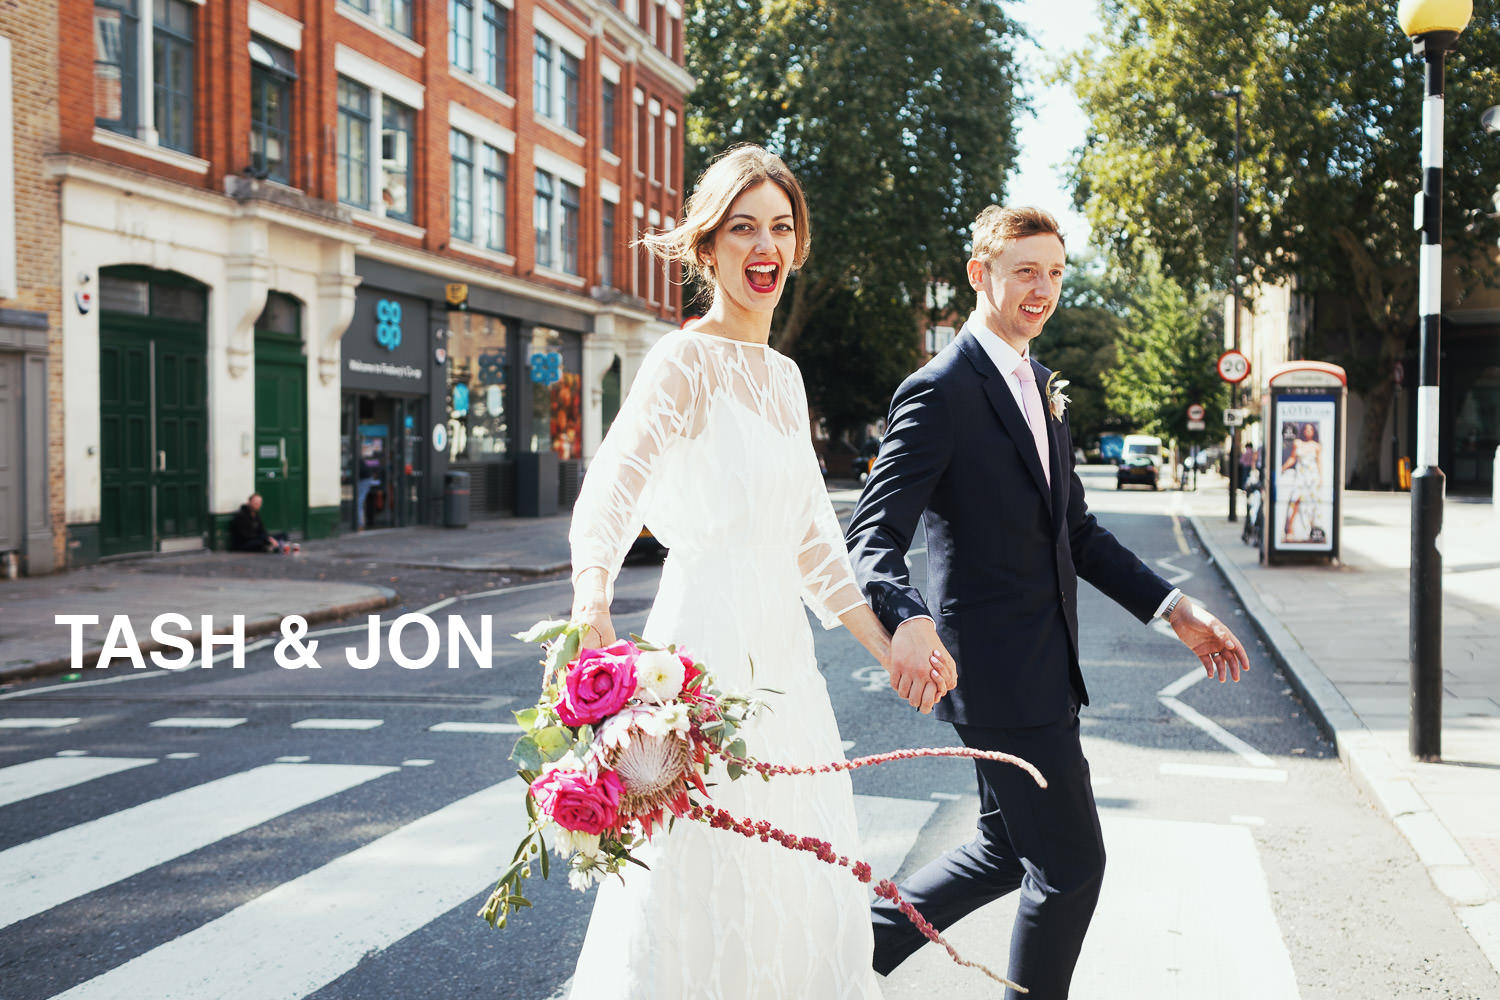 Bride and groom crossing Tysoe Street near Exmouth market. The woman is wearing a Halfpenny dress and is holding pink flowers, she is smiling widely at the camera. The groom is wearing a dark suit and pale pink tie. The Co-op and a phone box are in the background. Wedding photojournalism style photograph in London.